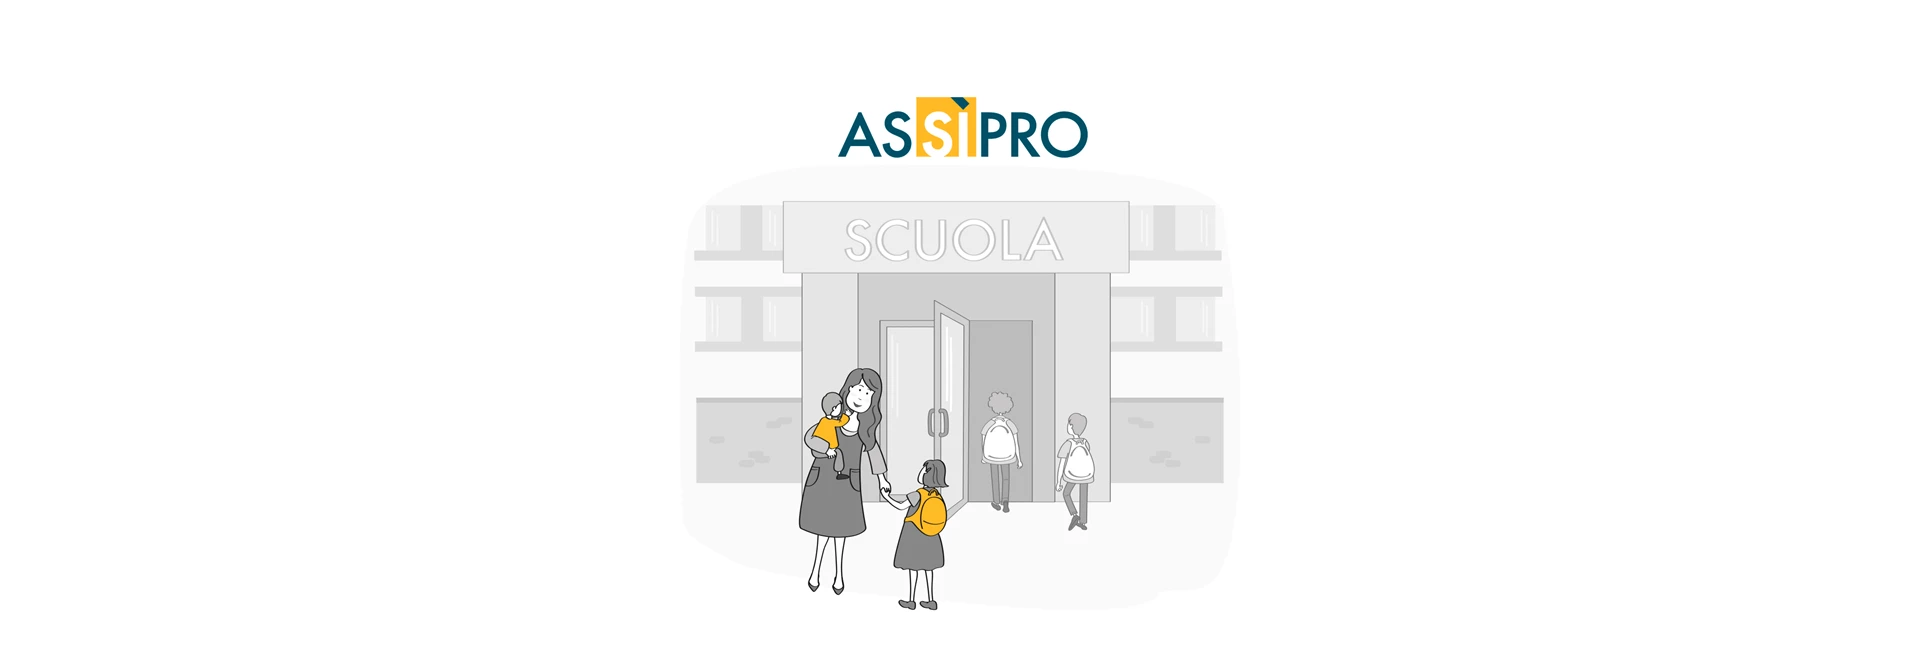 assipro